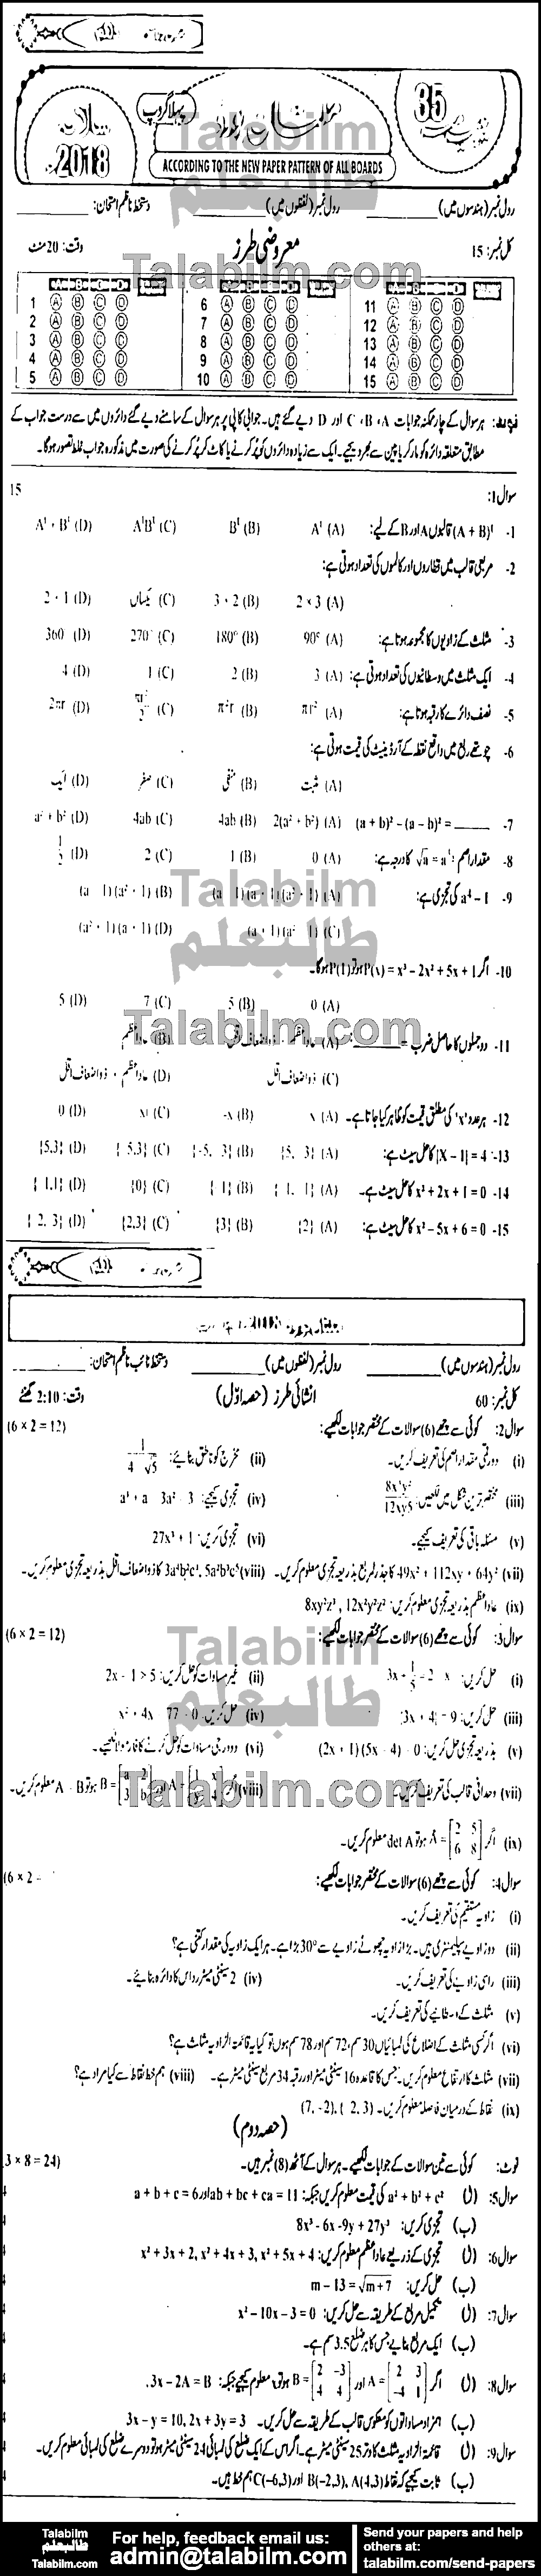 General Math 0 past paper for 2018 Group-I